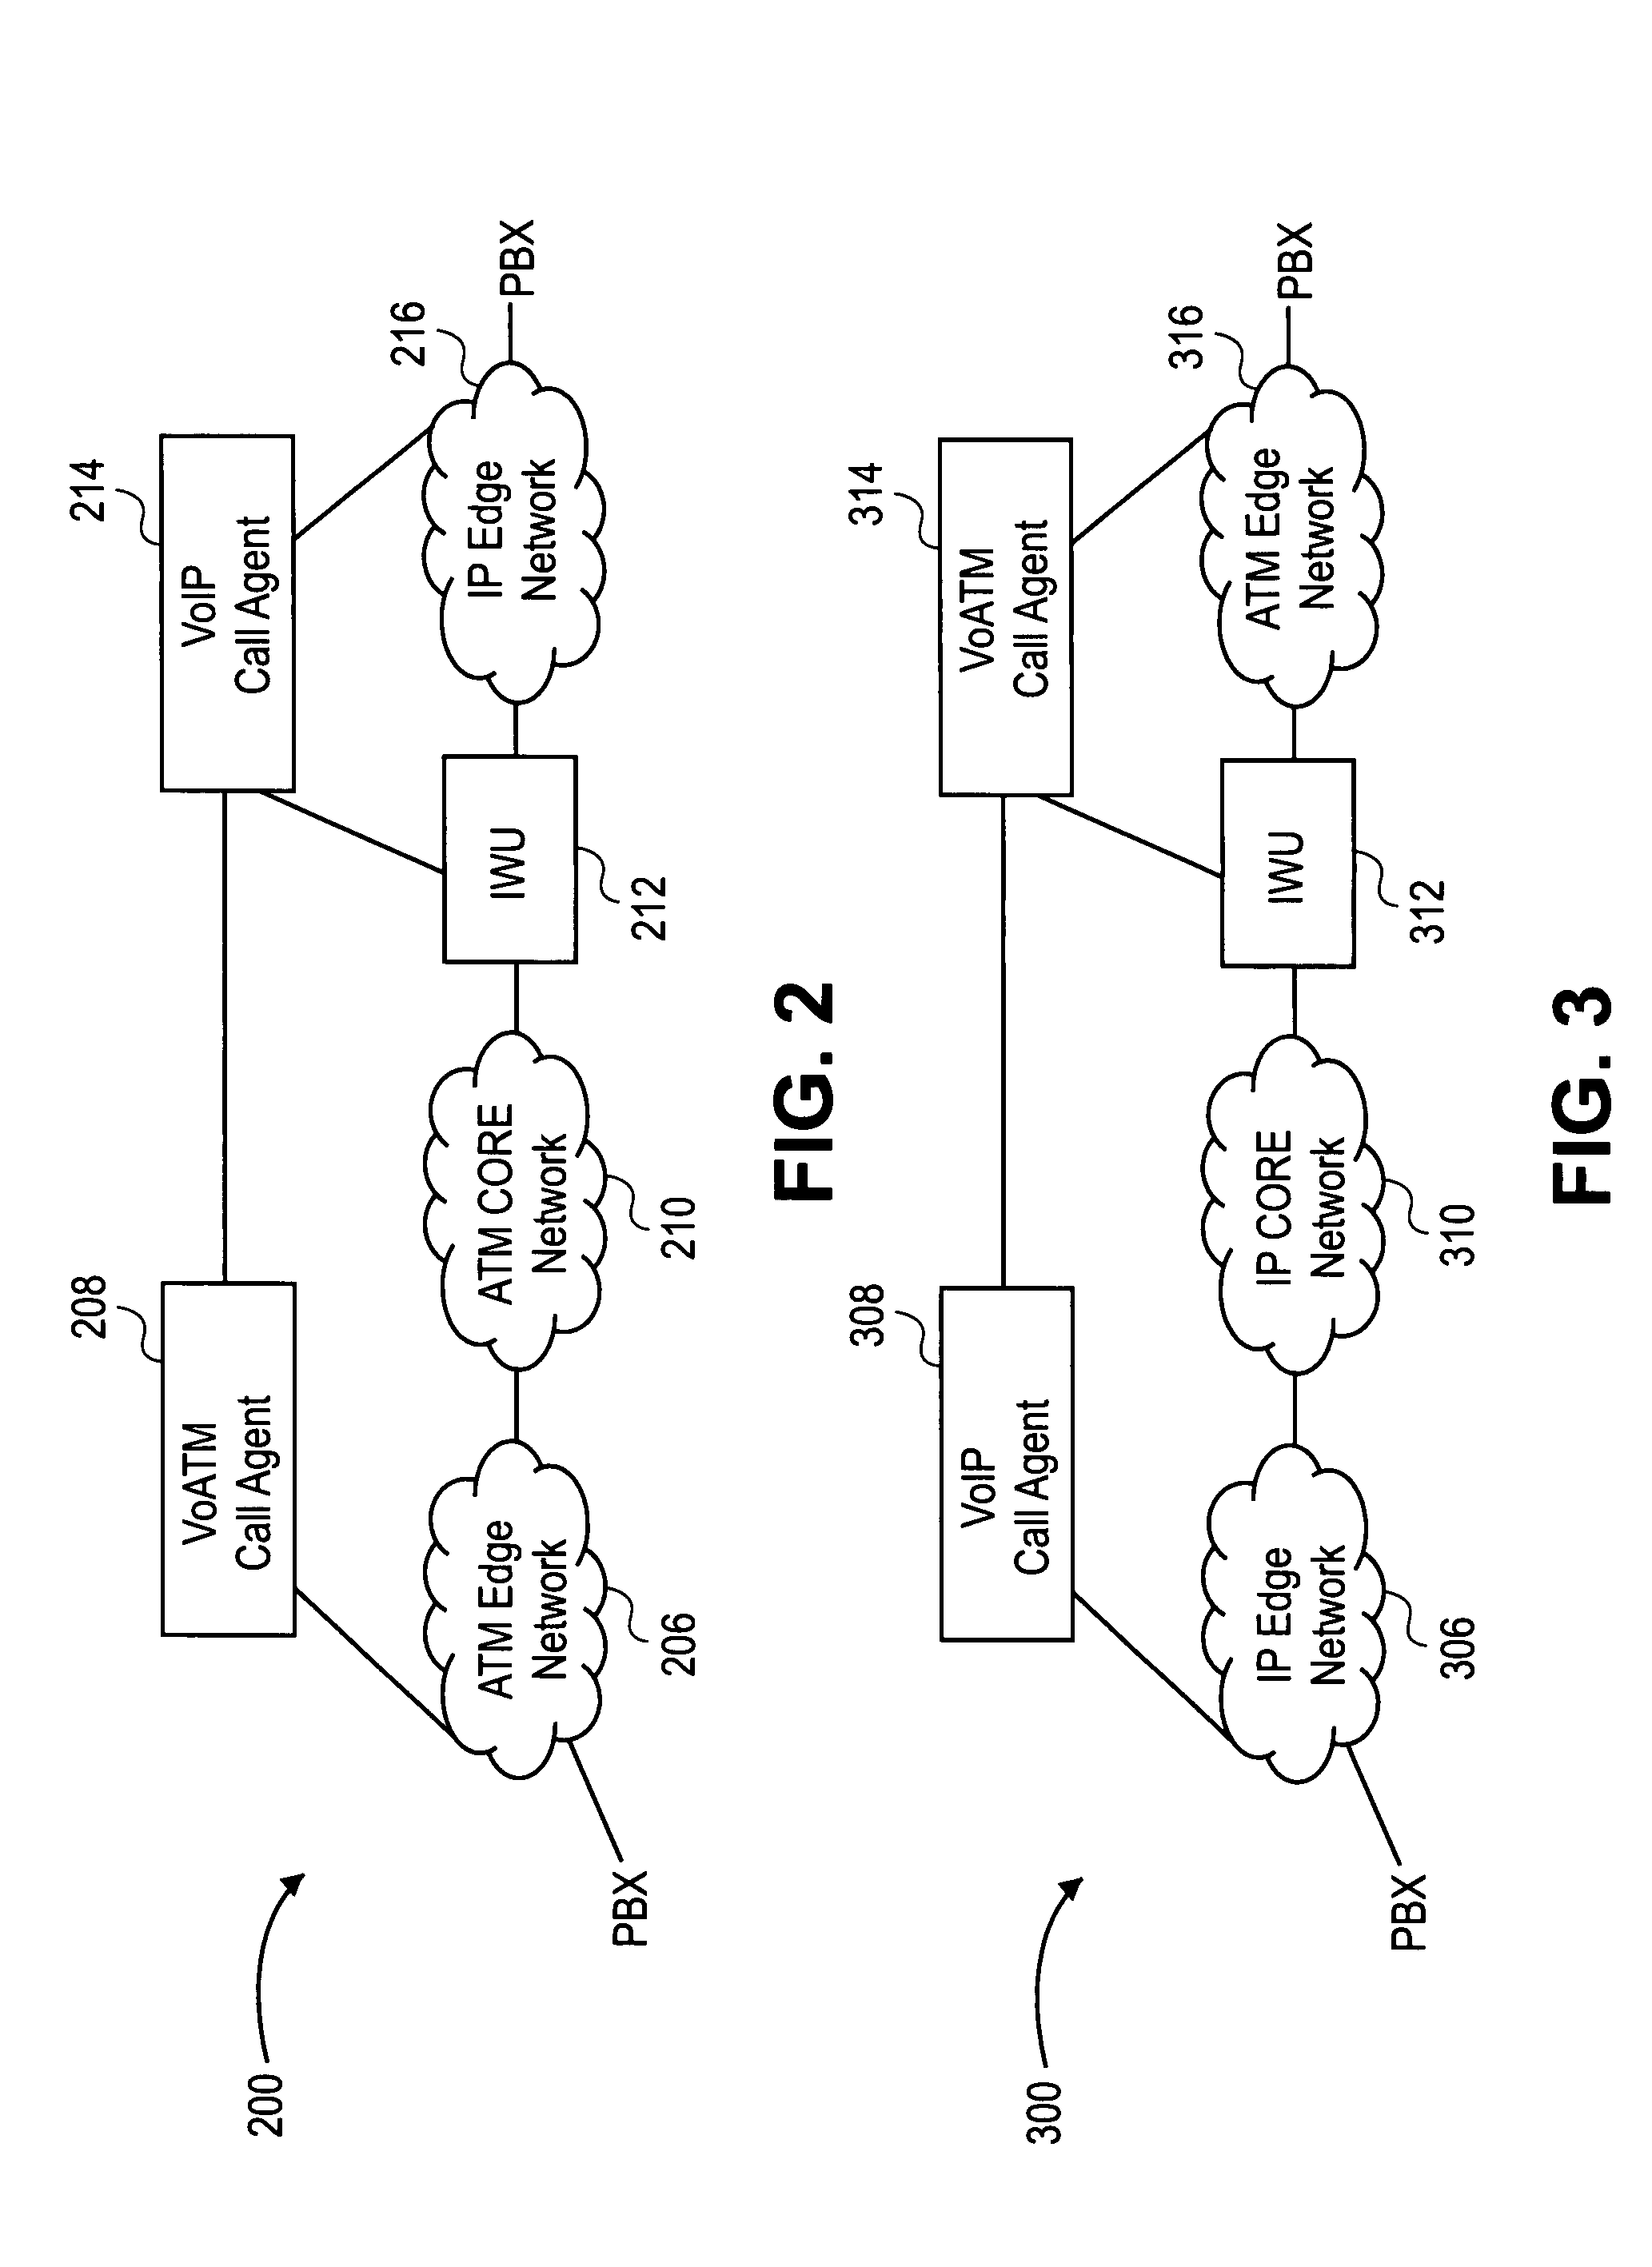 Interworking of IP voice with ATM voice using server-based control